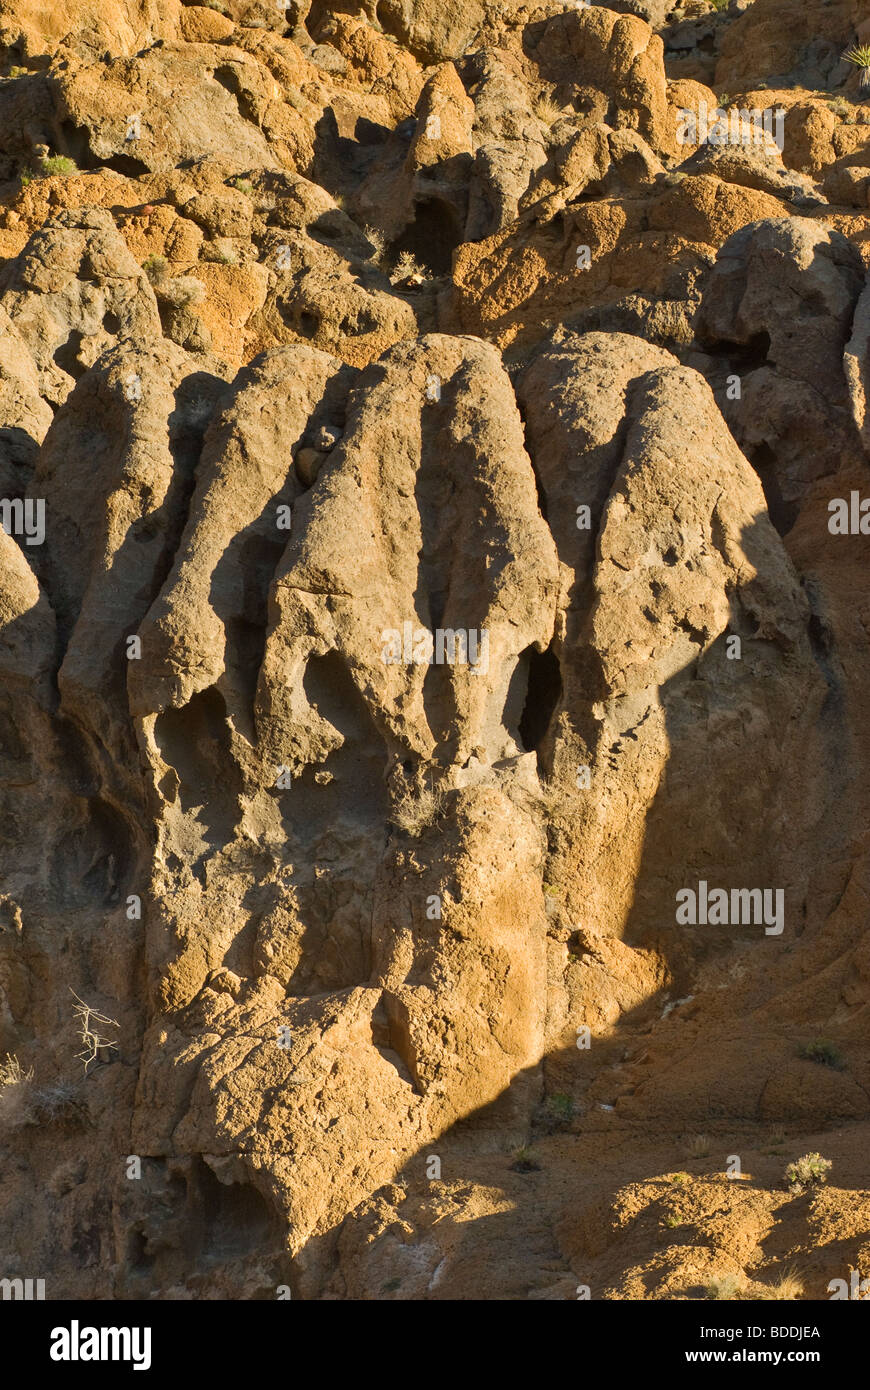 Hole-in-the-Wall rocks at Mojave National Preserve, California, USA Stock Photo